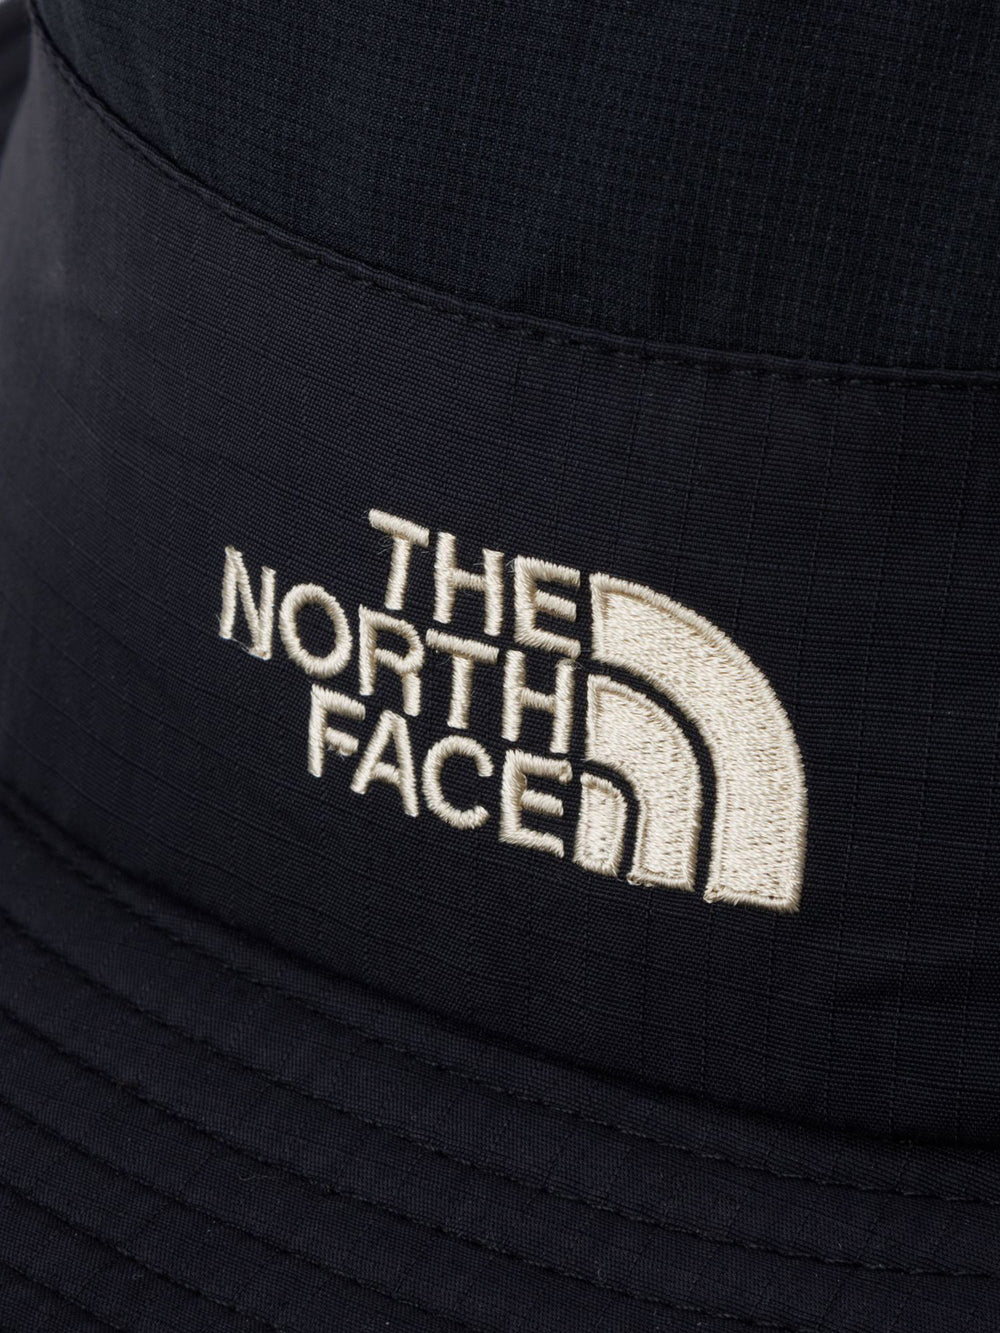 [THE NORTH FACE] Sun Shield Hat / North Face Unisex Outdoor UV Protection UV Protection Sunburn NN02308 [A] 23SS